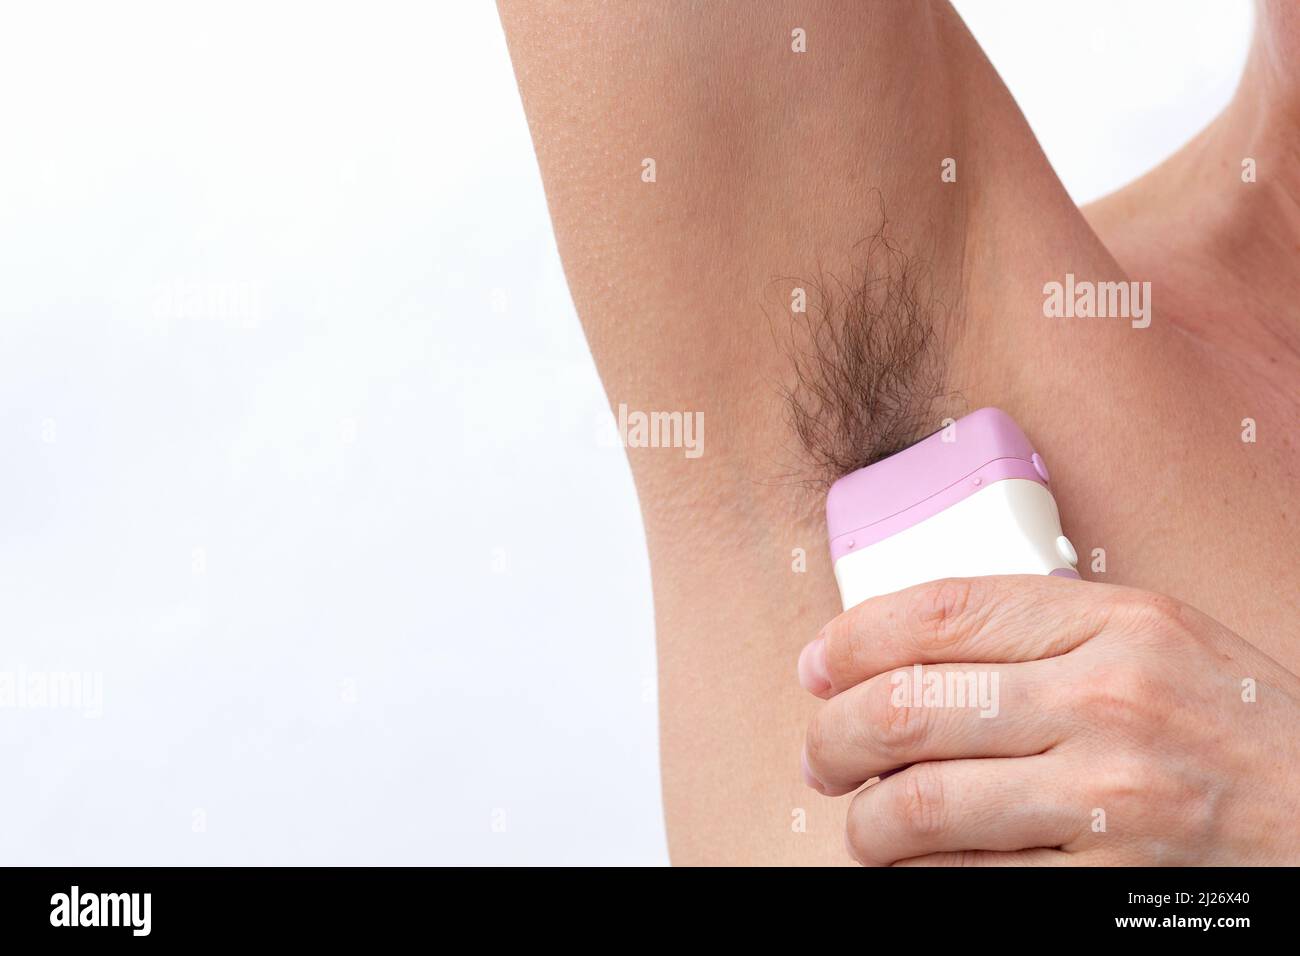 Woman hand removing hair from armpit using electric epilator on white background Stock Photo